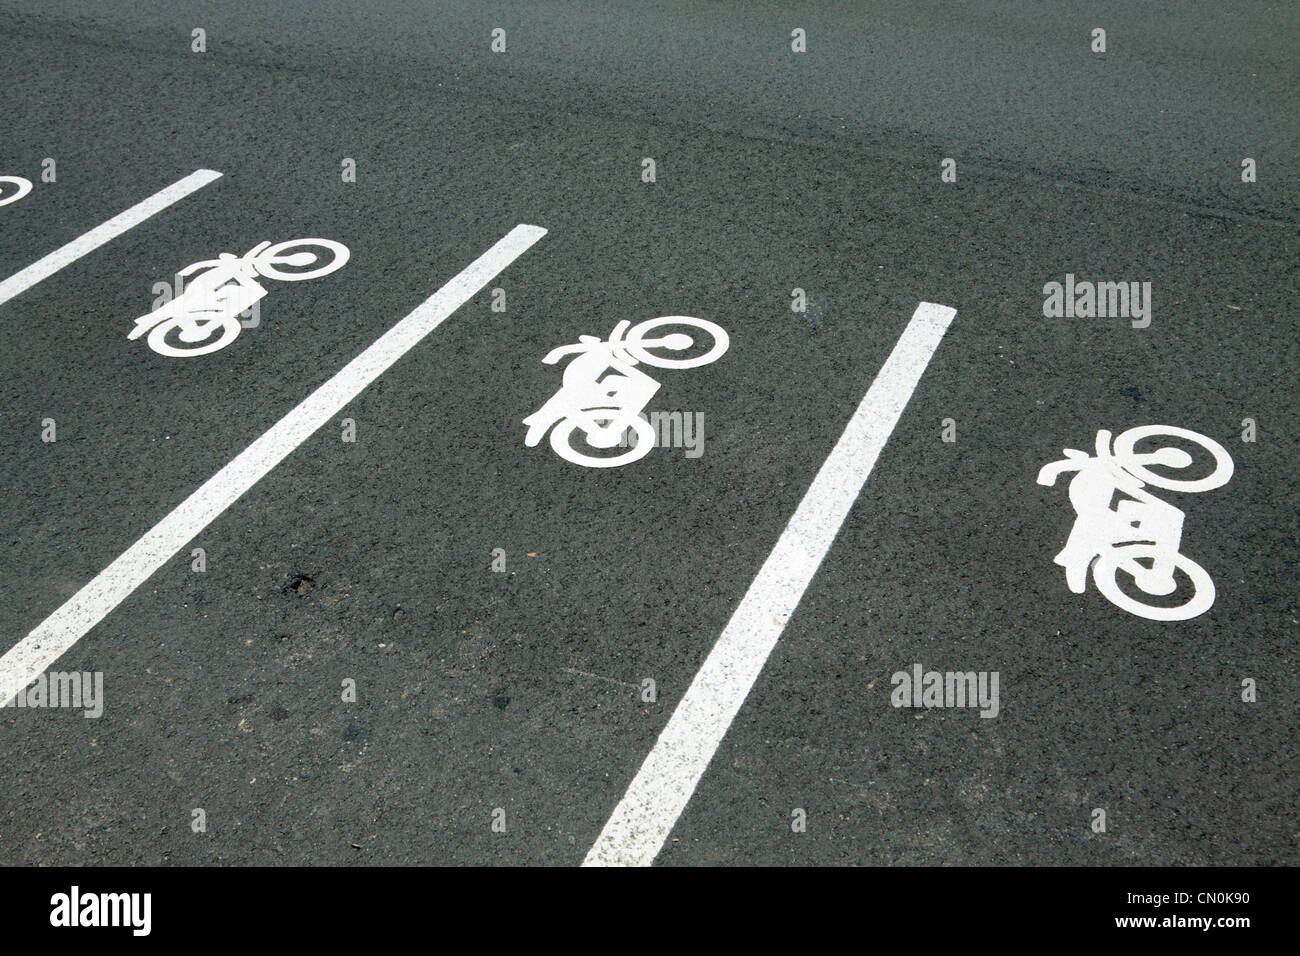 Motorcycle Parking Area